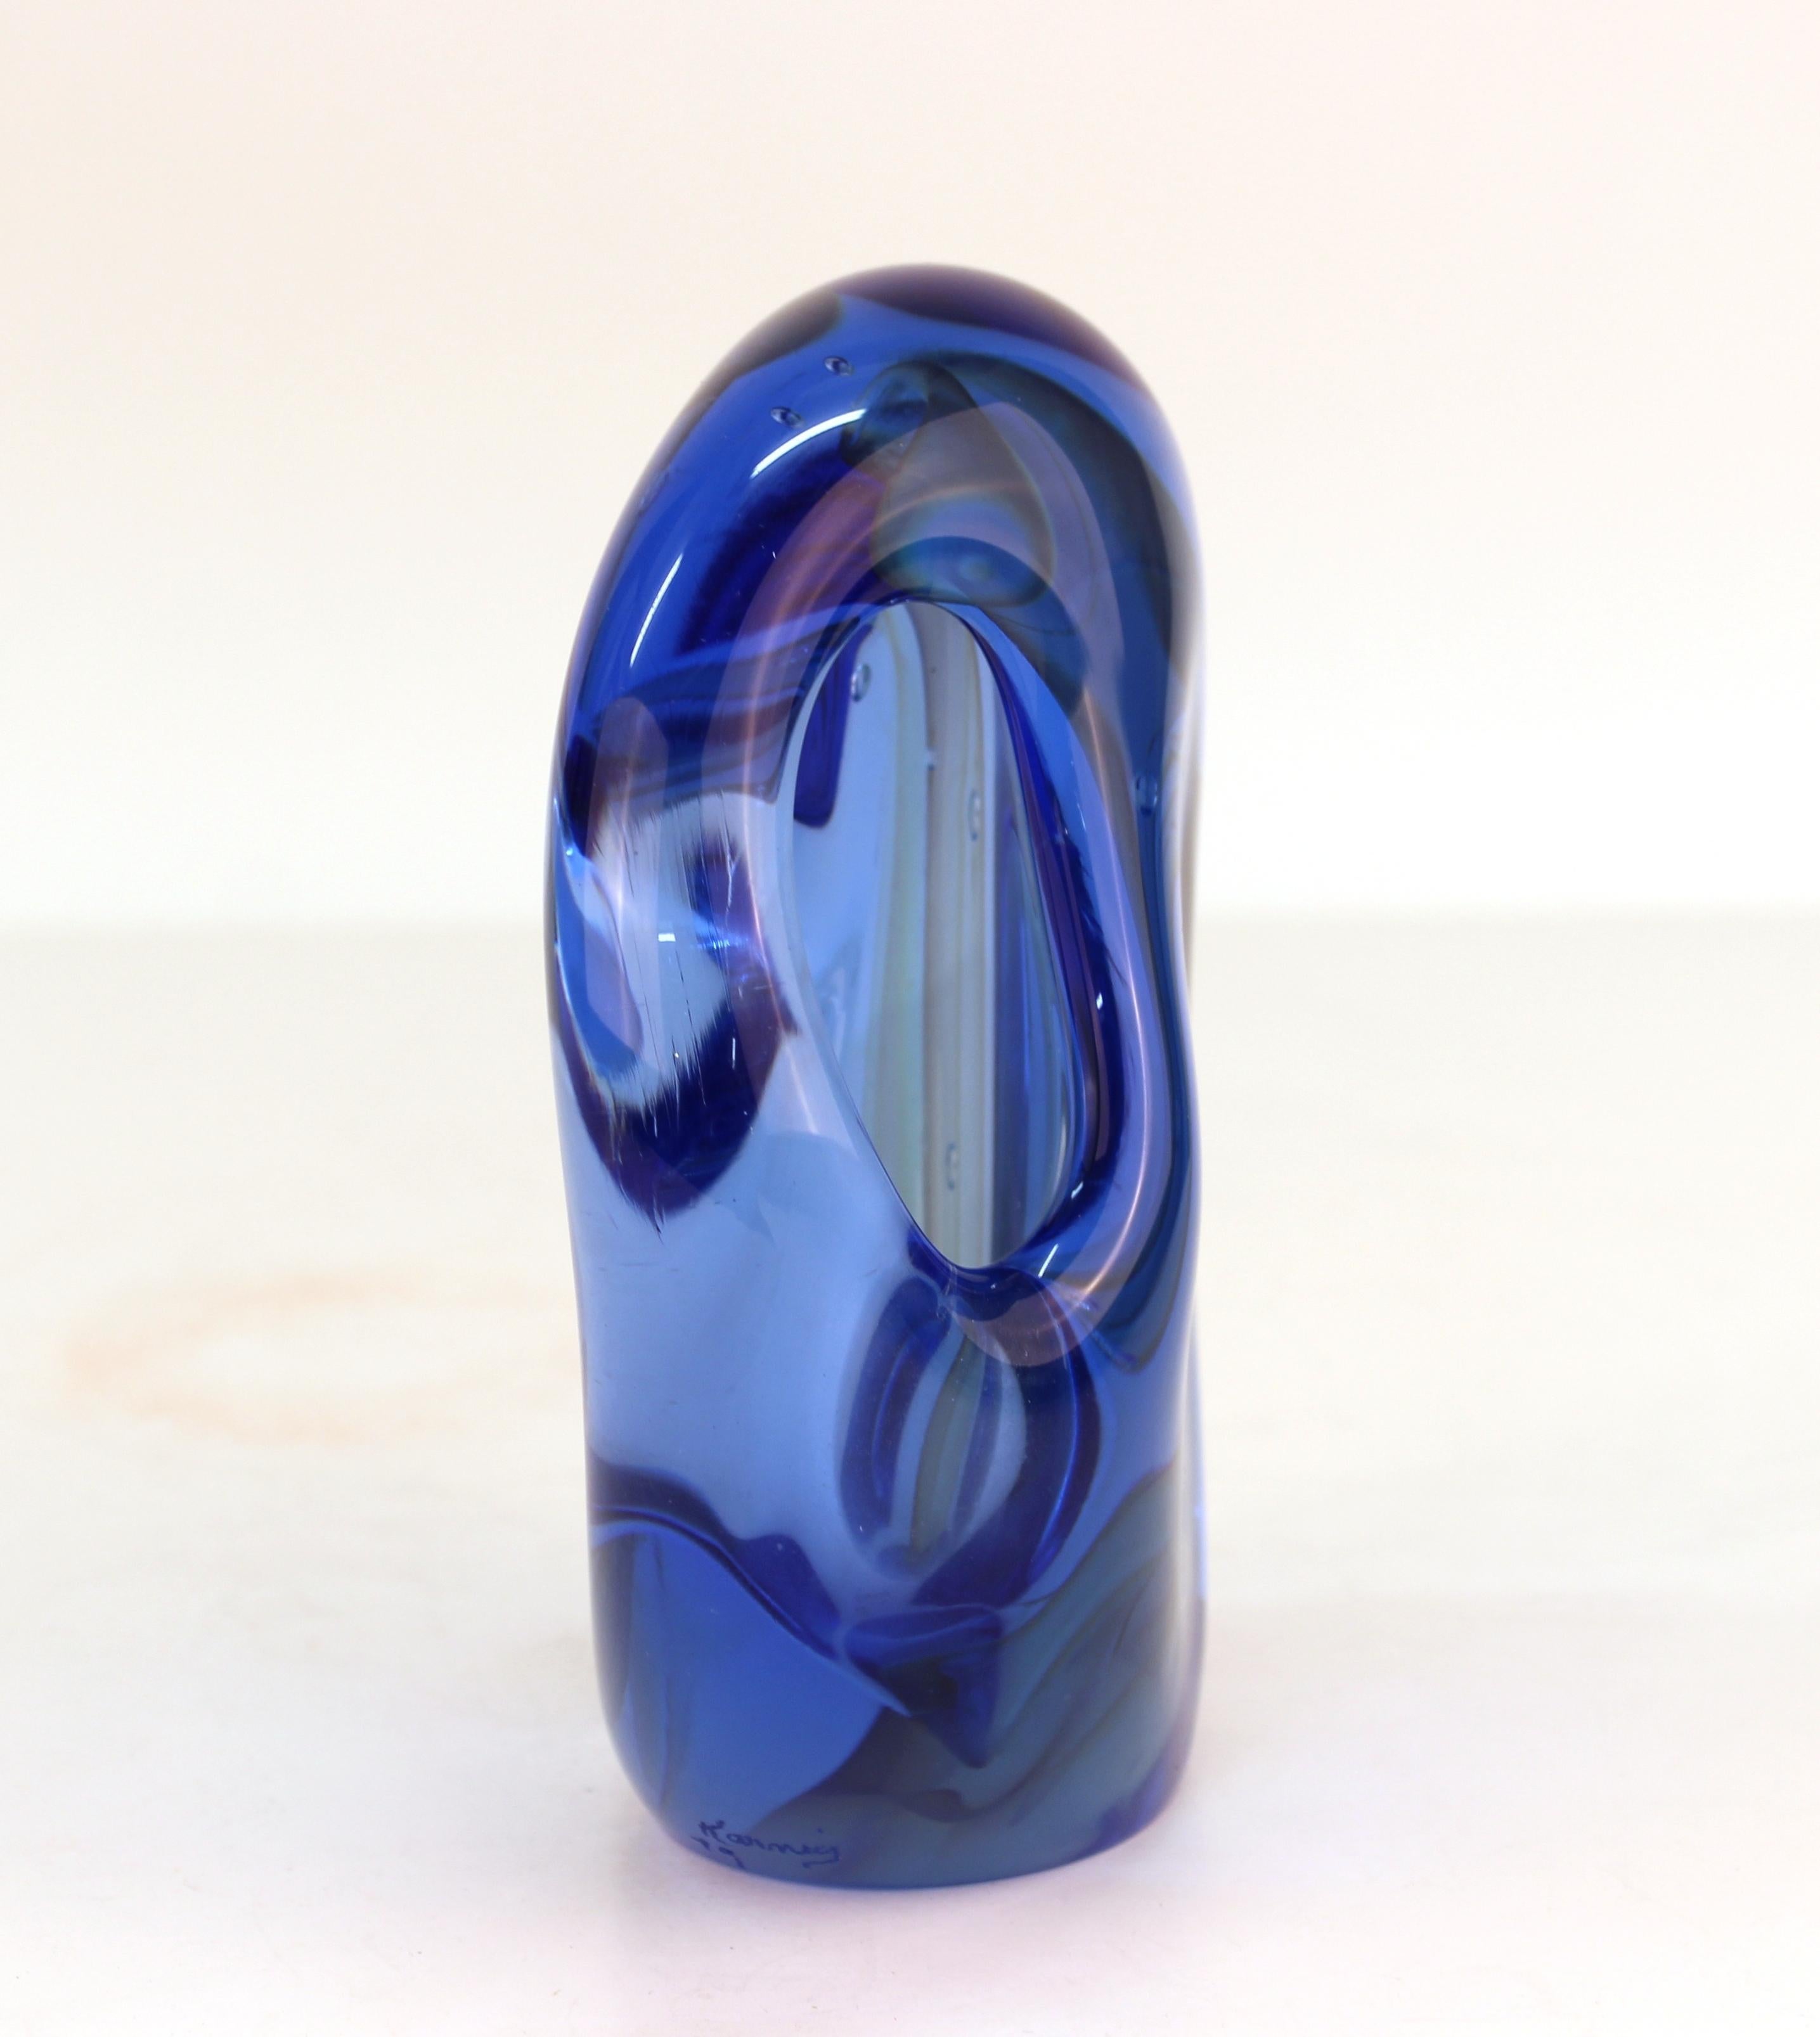 Modernist abstract studio art glass sculpture by master glass artist Karnig Dabanian, in shades of blue. The piece is in great vintage condition.